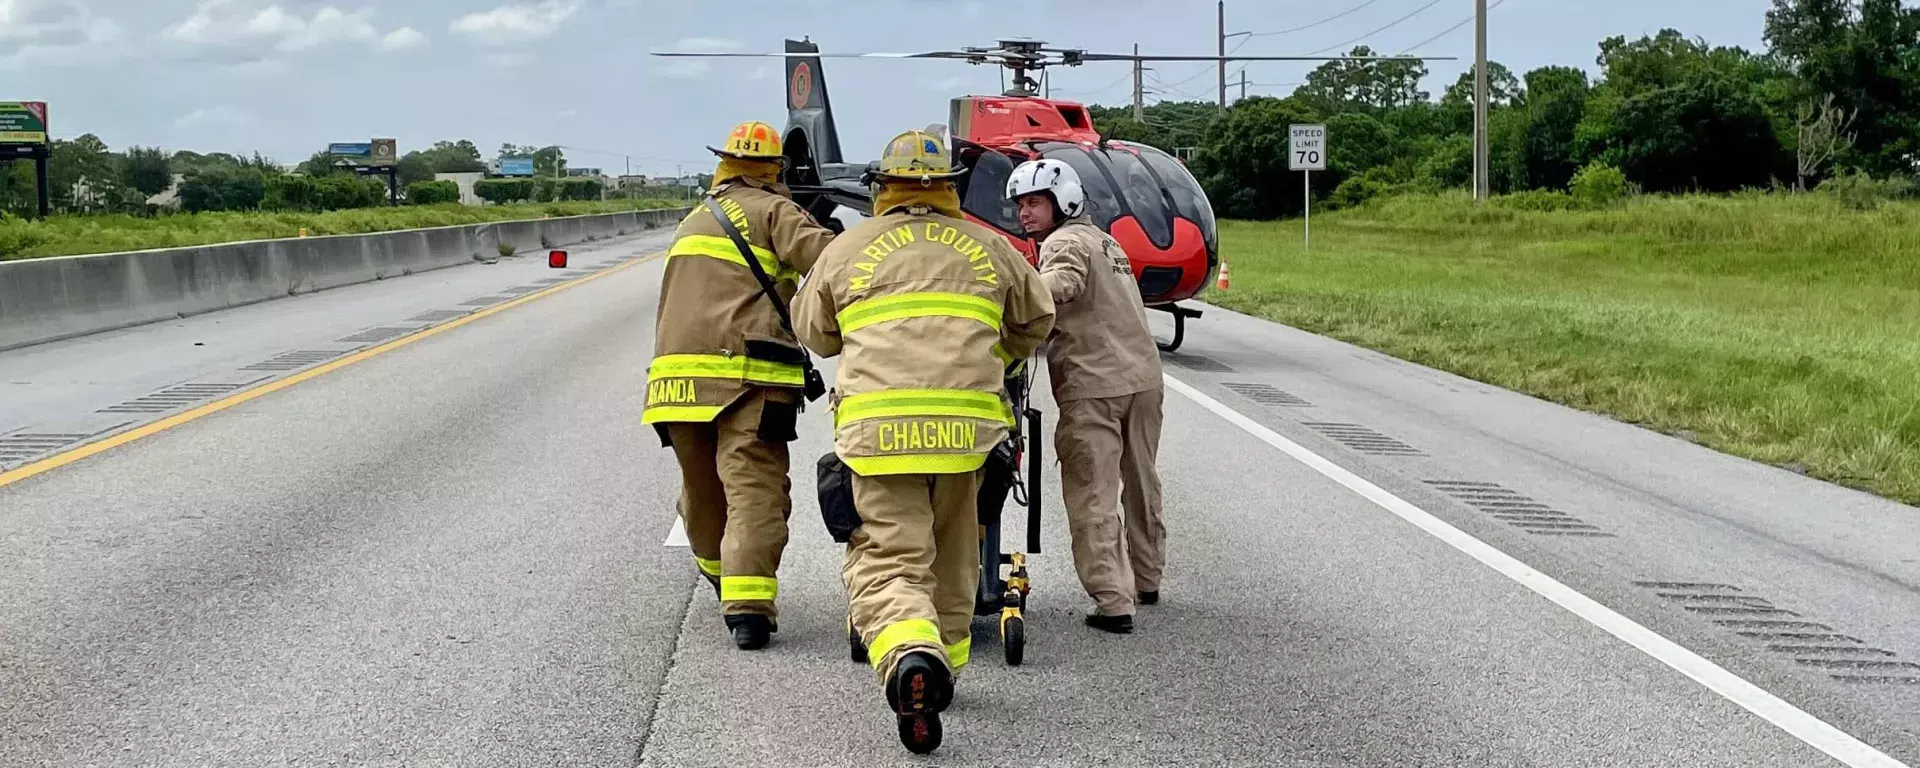 Crew on the highway in front of the LifeStar helicopter